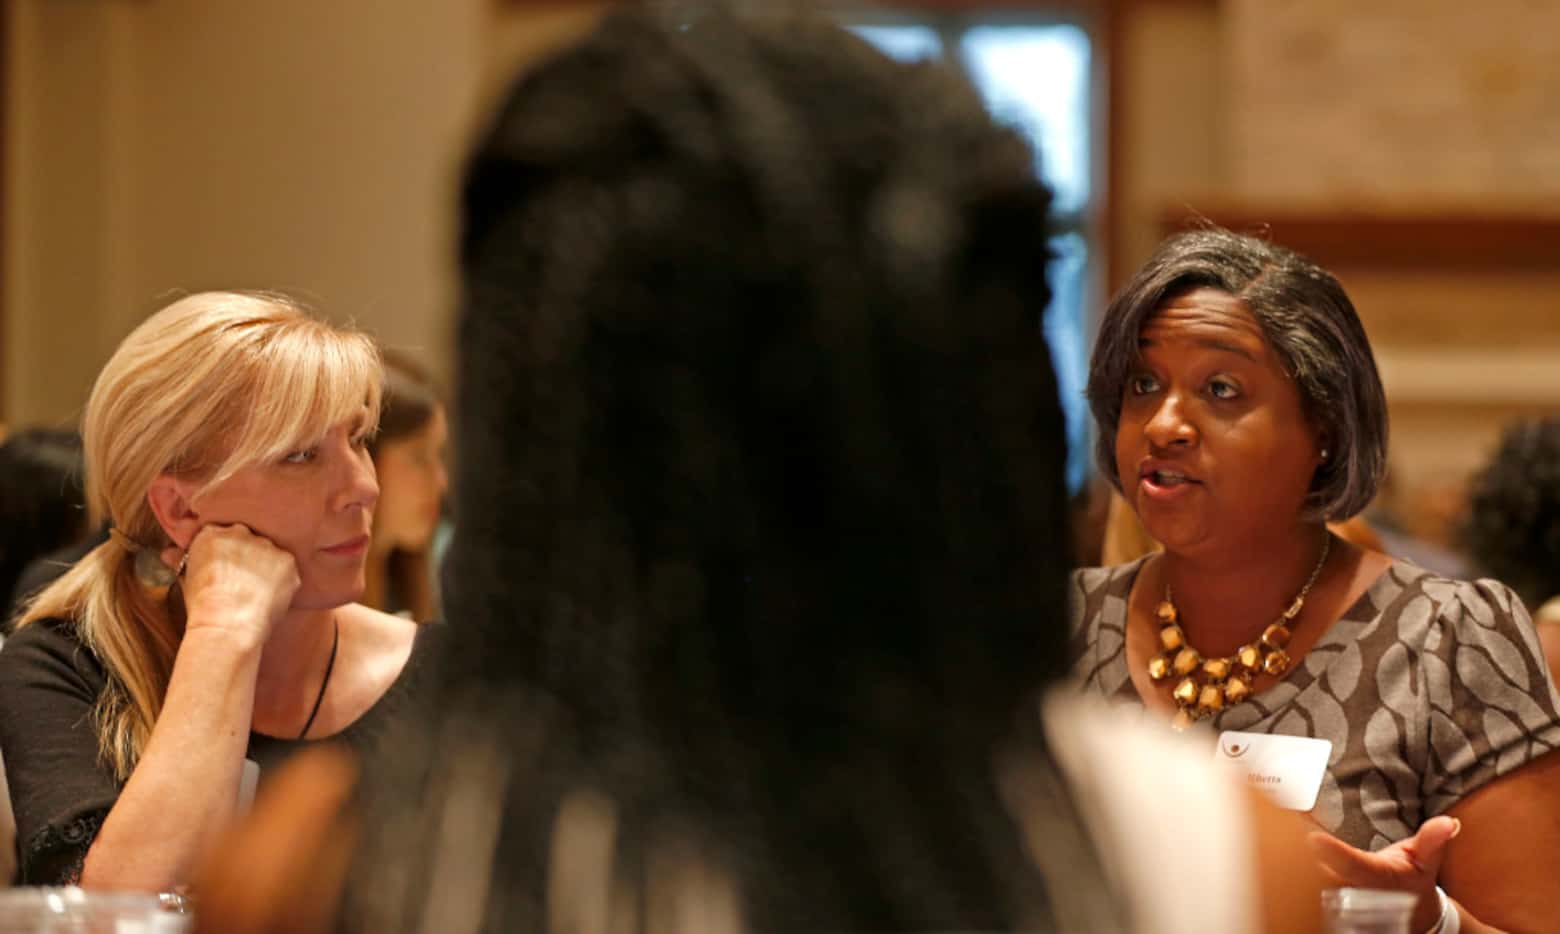 Rachel Ridge (left) watches Rhetta Bowers talk about race at the dining table during the...